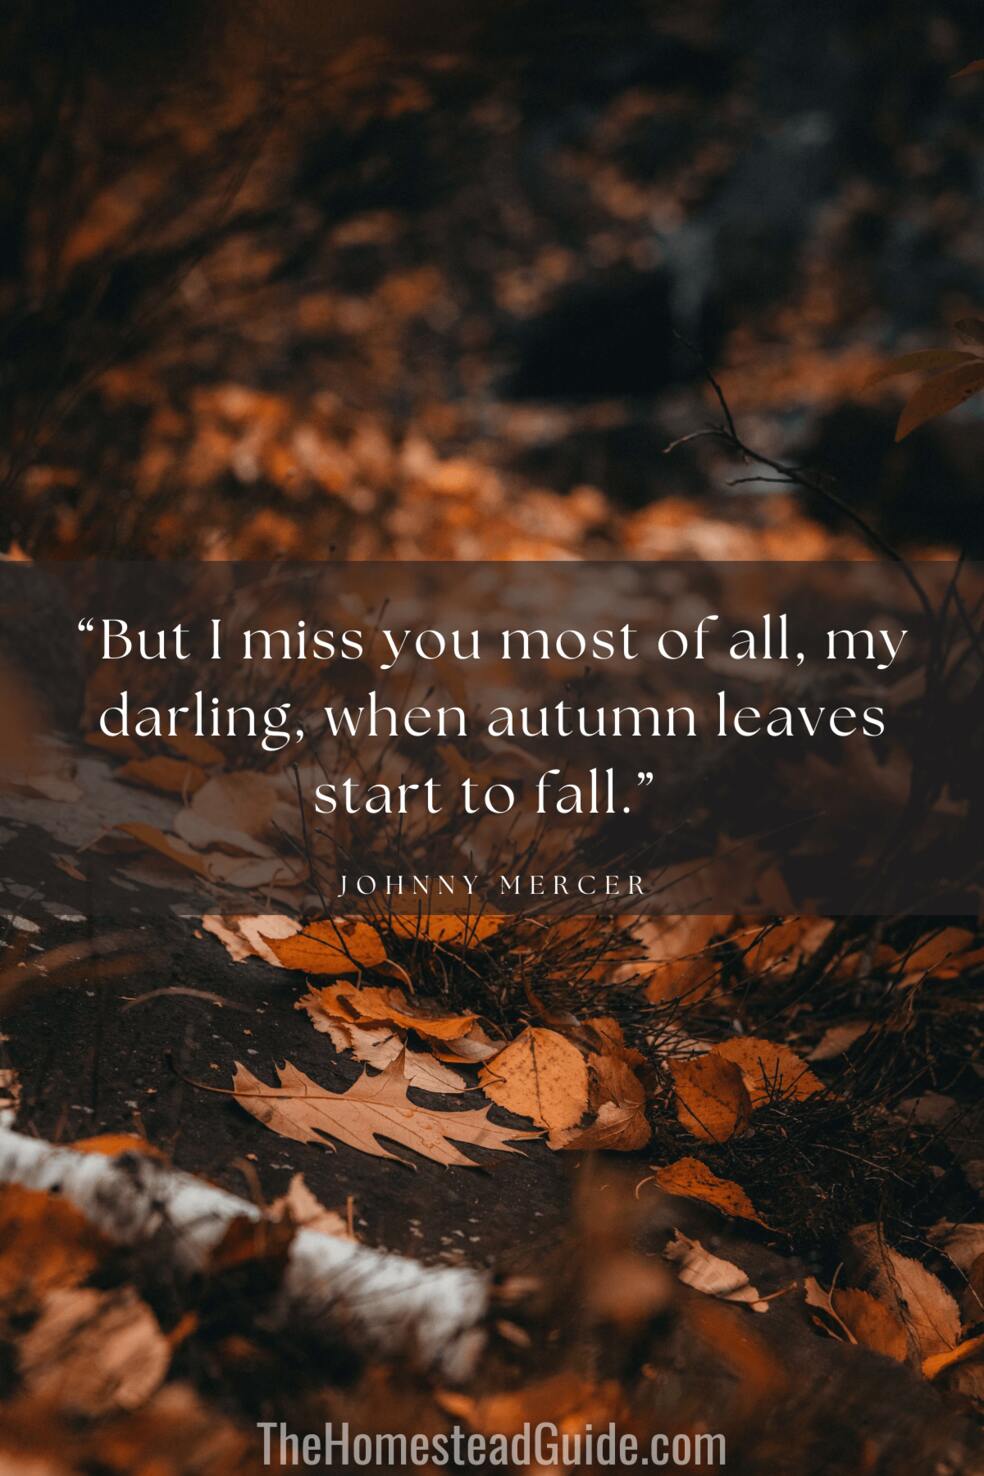 But I miss you most of all, my darling, when autumn leaves start to fall.